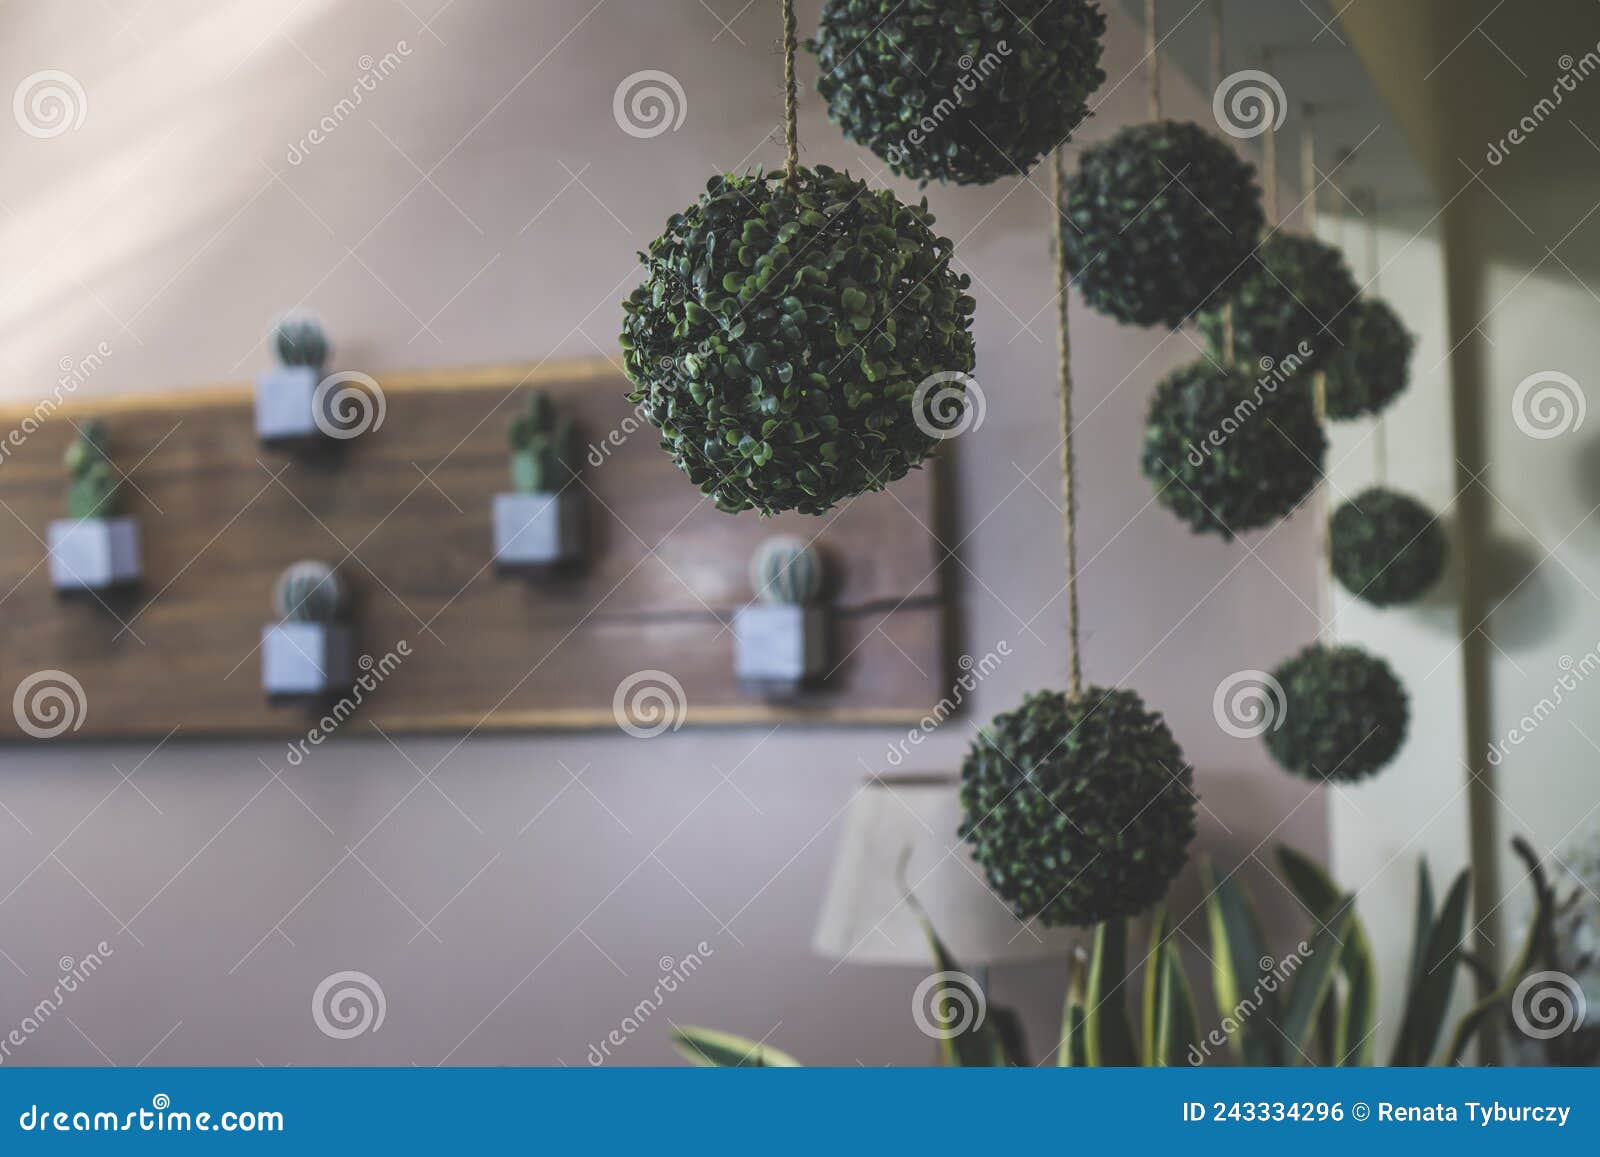 Hanging Fake Indoor Plants from a Wall in the Shape of Ball. Balls ...